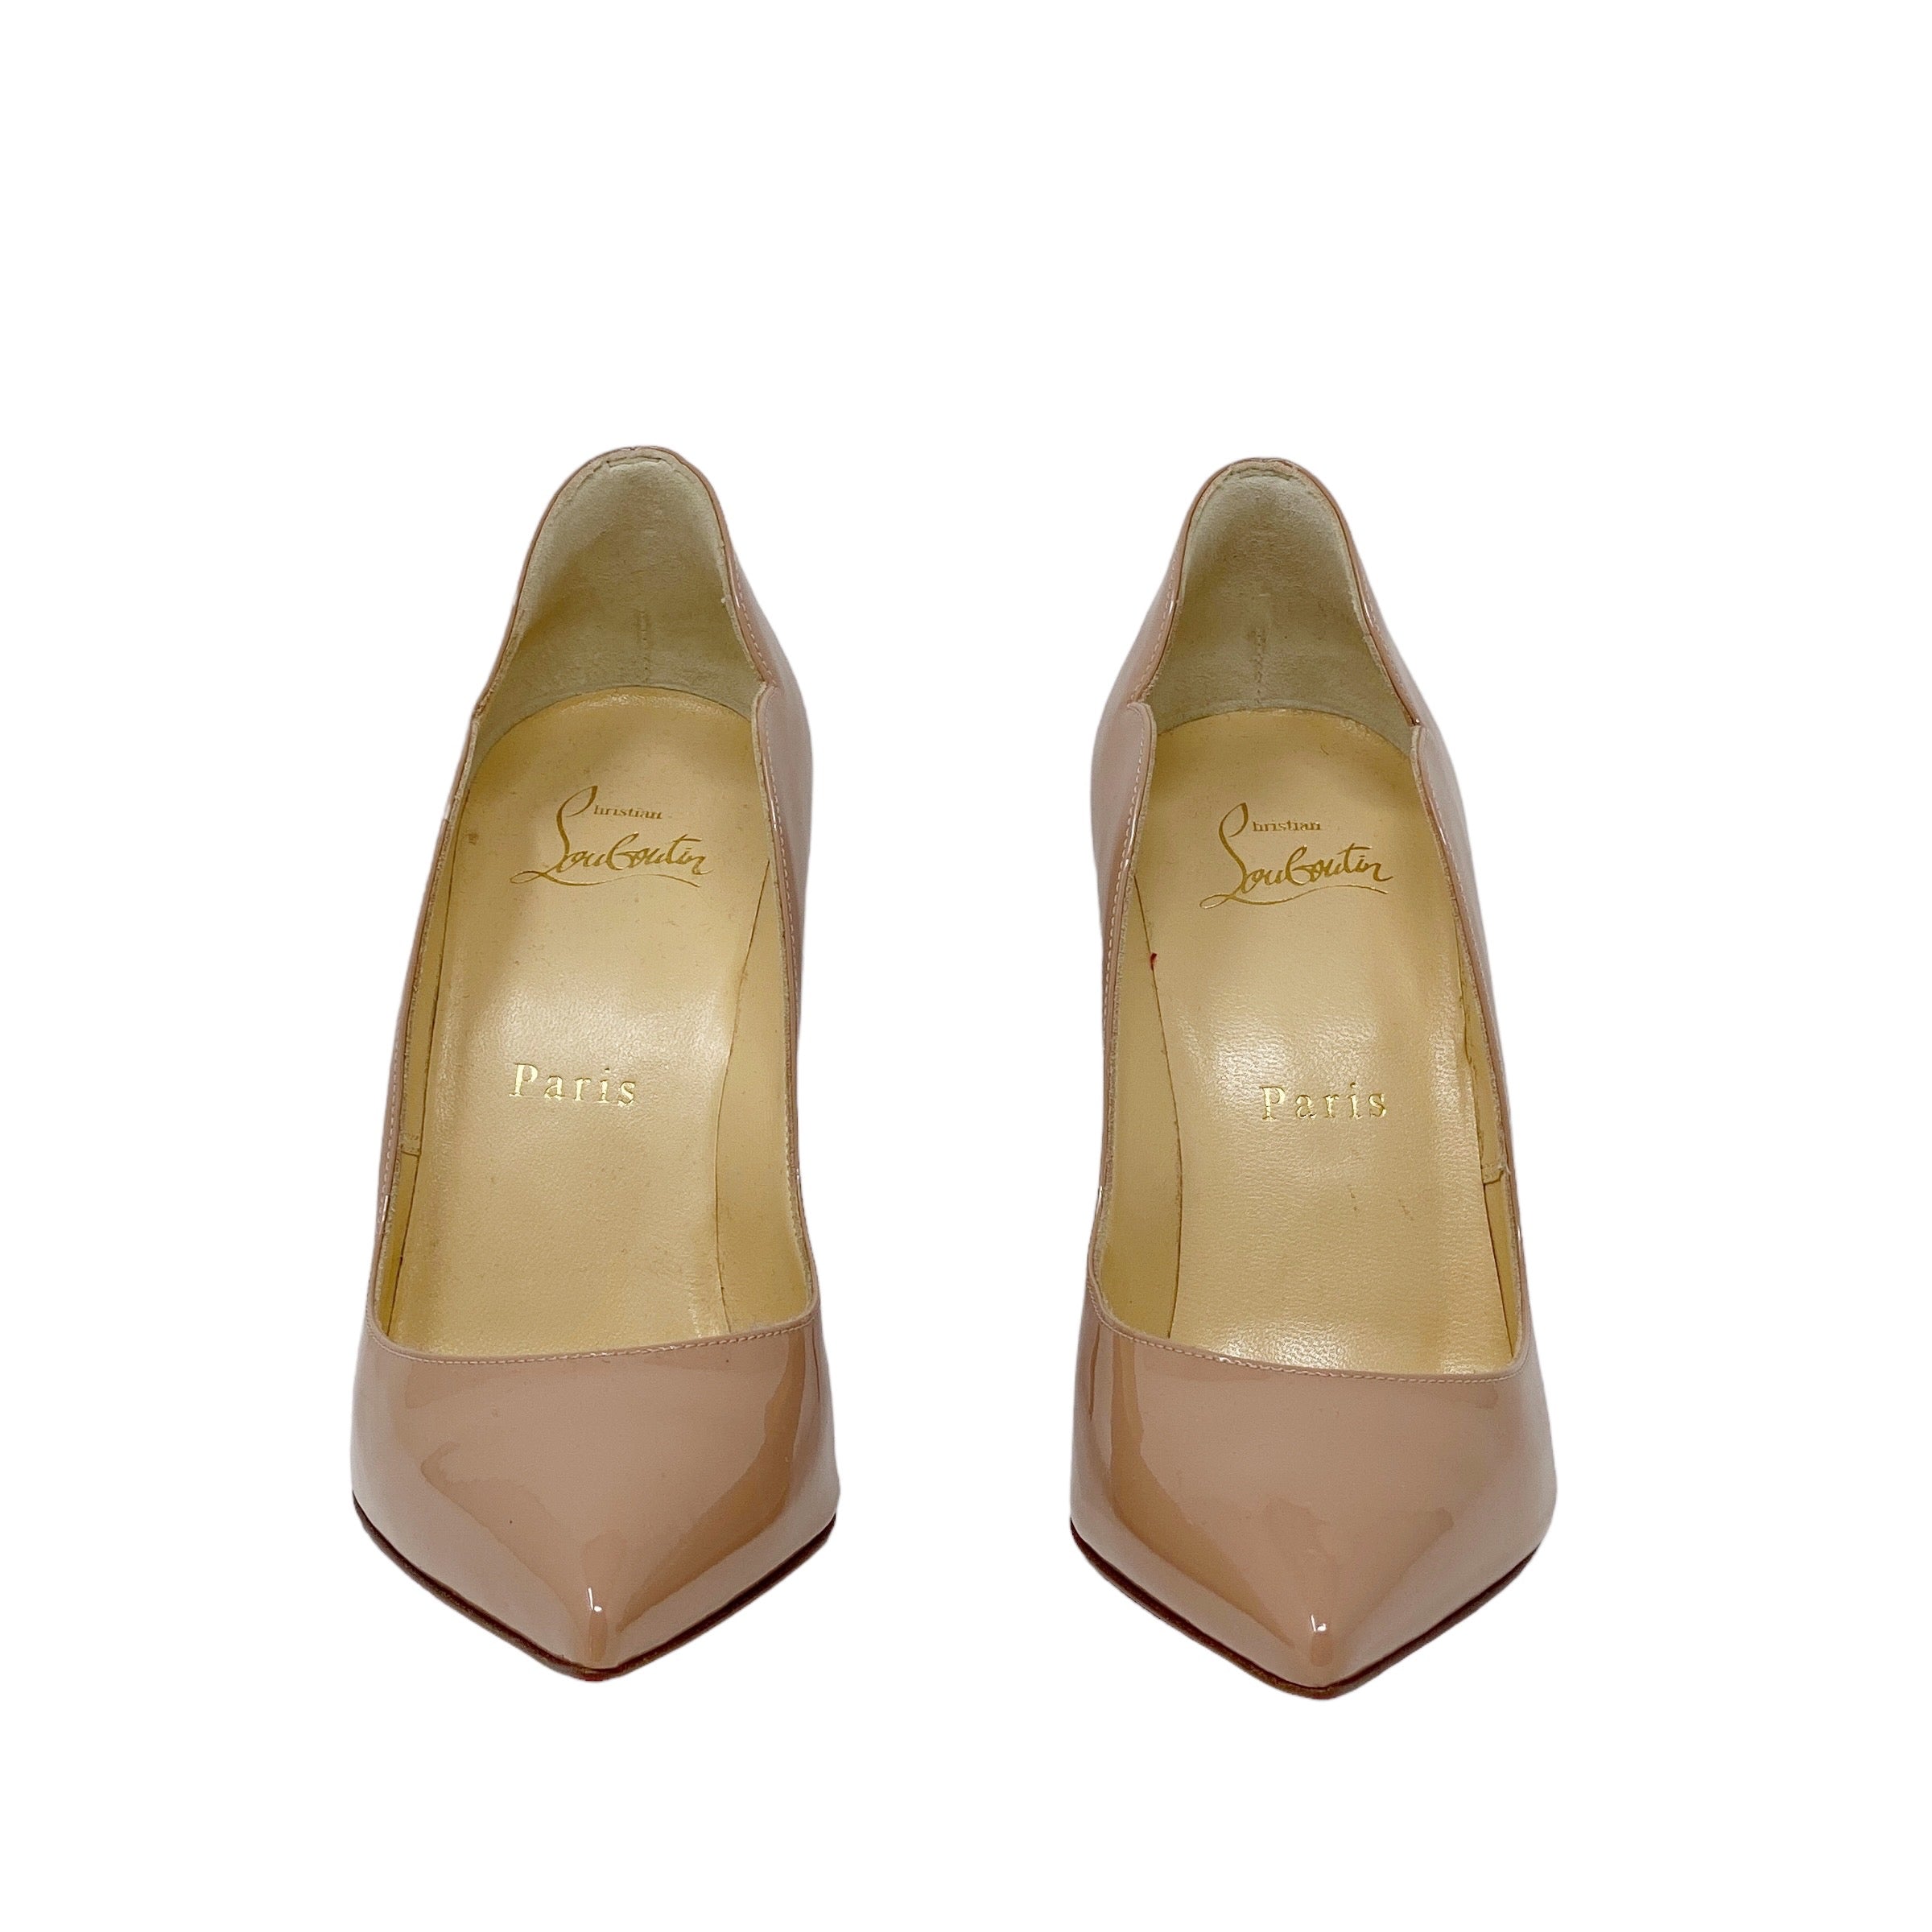 Christian Louboutin Nude Hot Chick Pumps 36